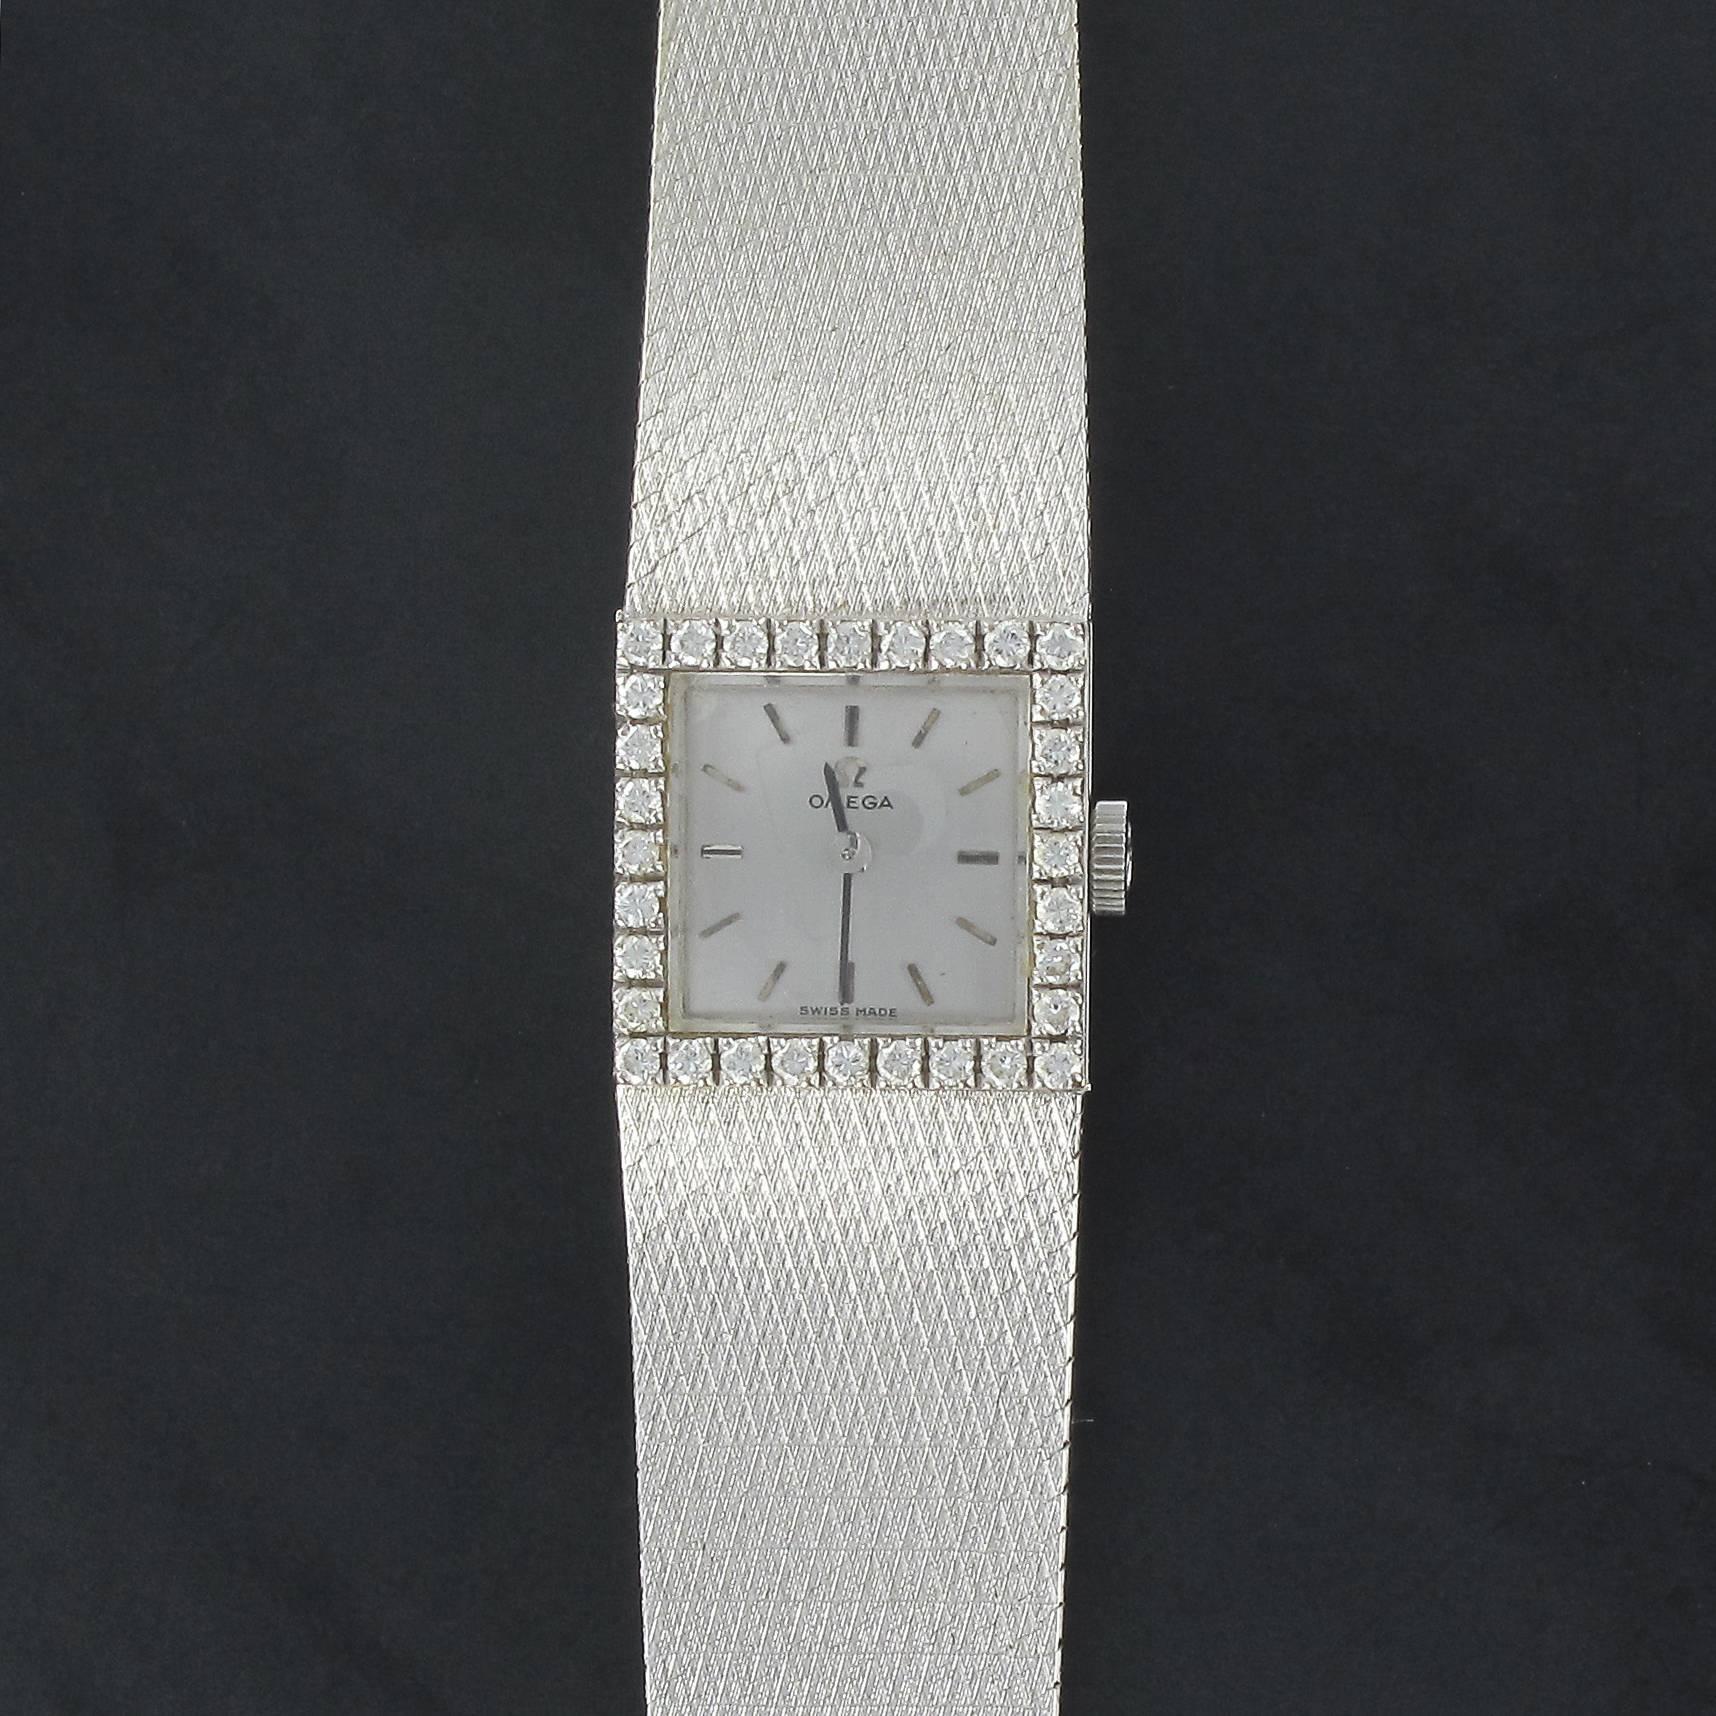 Women watch Omega Deville.
Square case in 18 carat white gold, set with 32 round brilliant cut diamonds.
Total weight of diamonds: 0.32 carat approximately.
Revised and controlled - Excellent condition and general appearance.
Mechanical